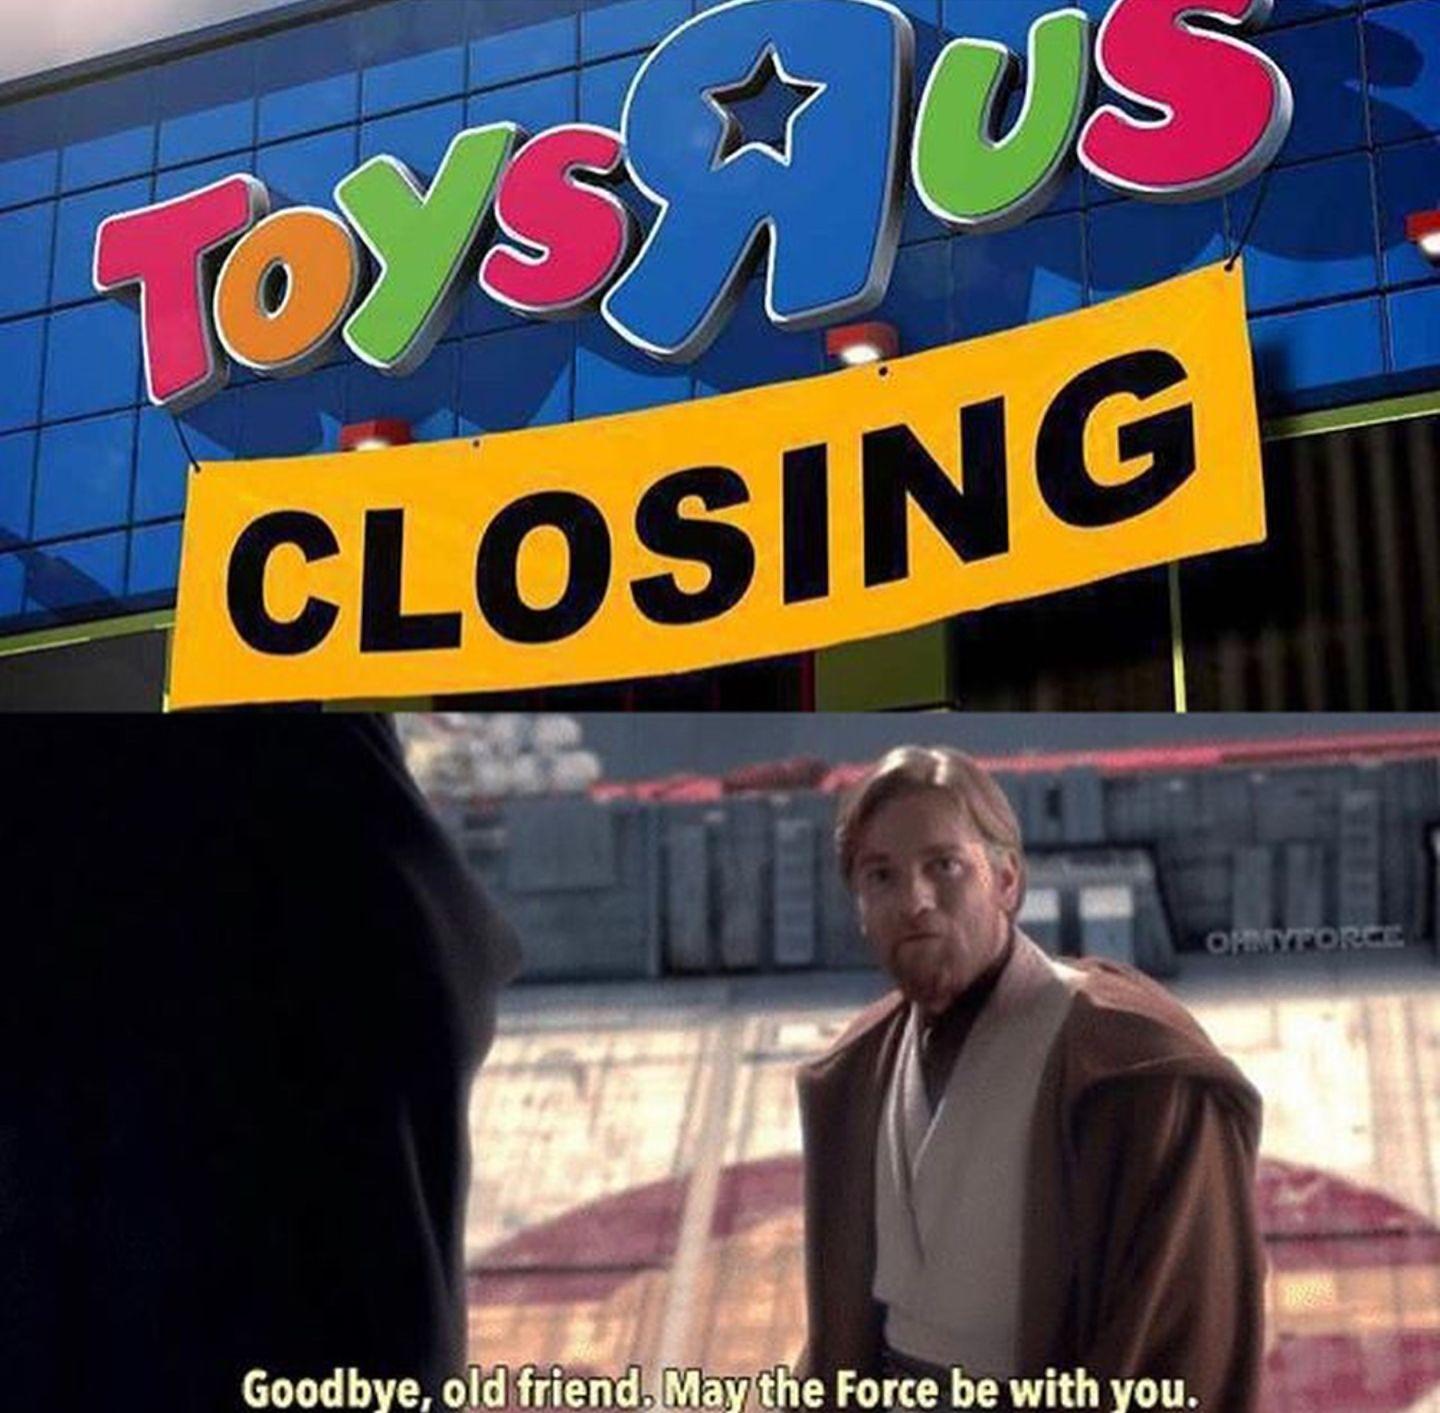 Old Toys R Us Logo - Goodbye Toys R Us and may the Force be with you